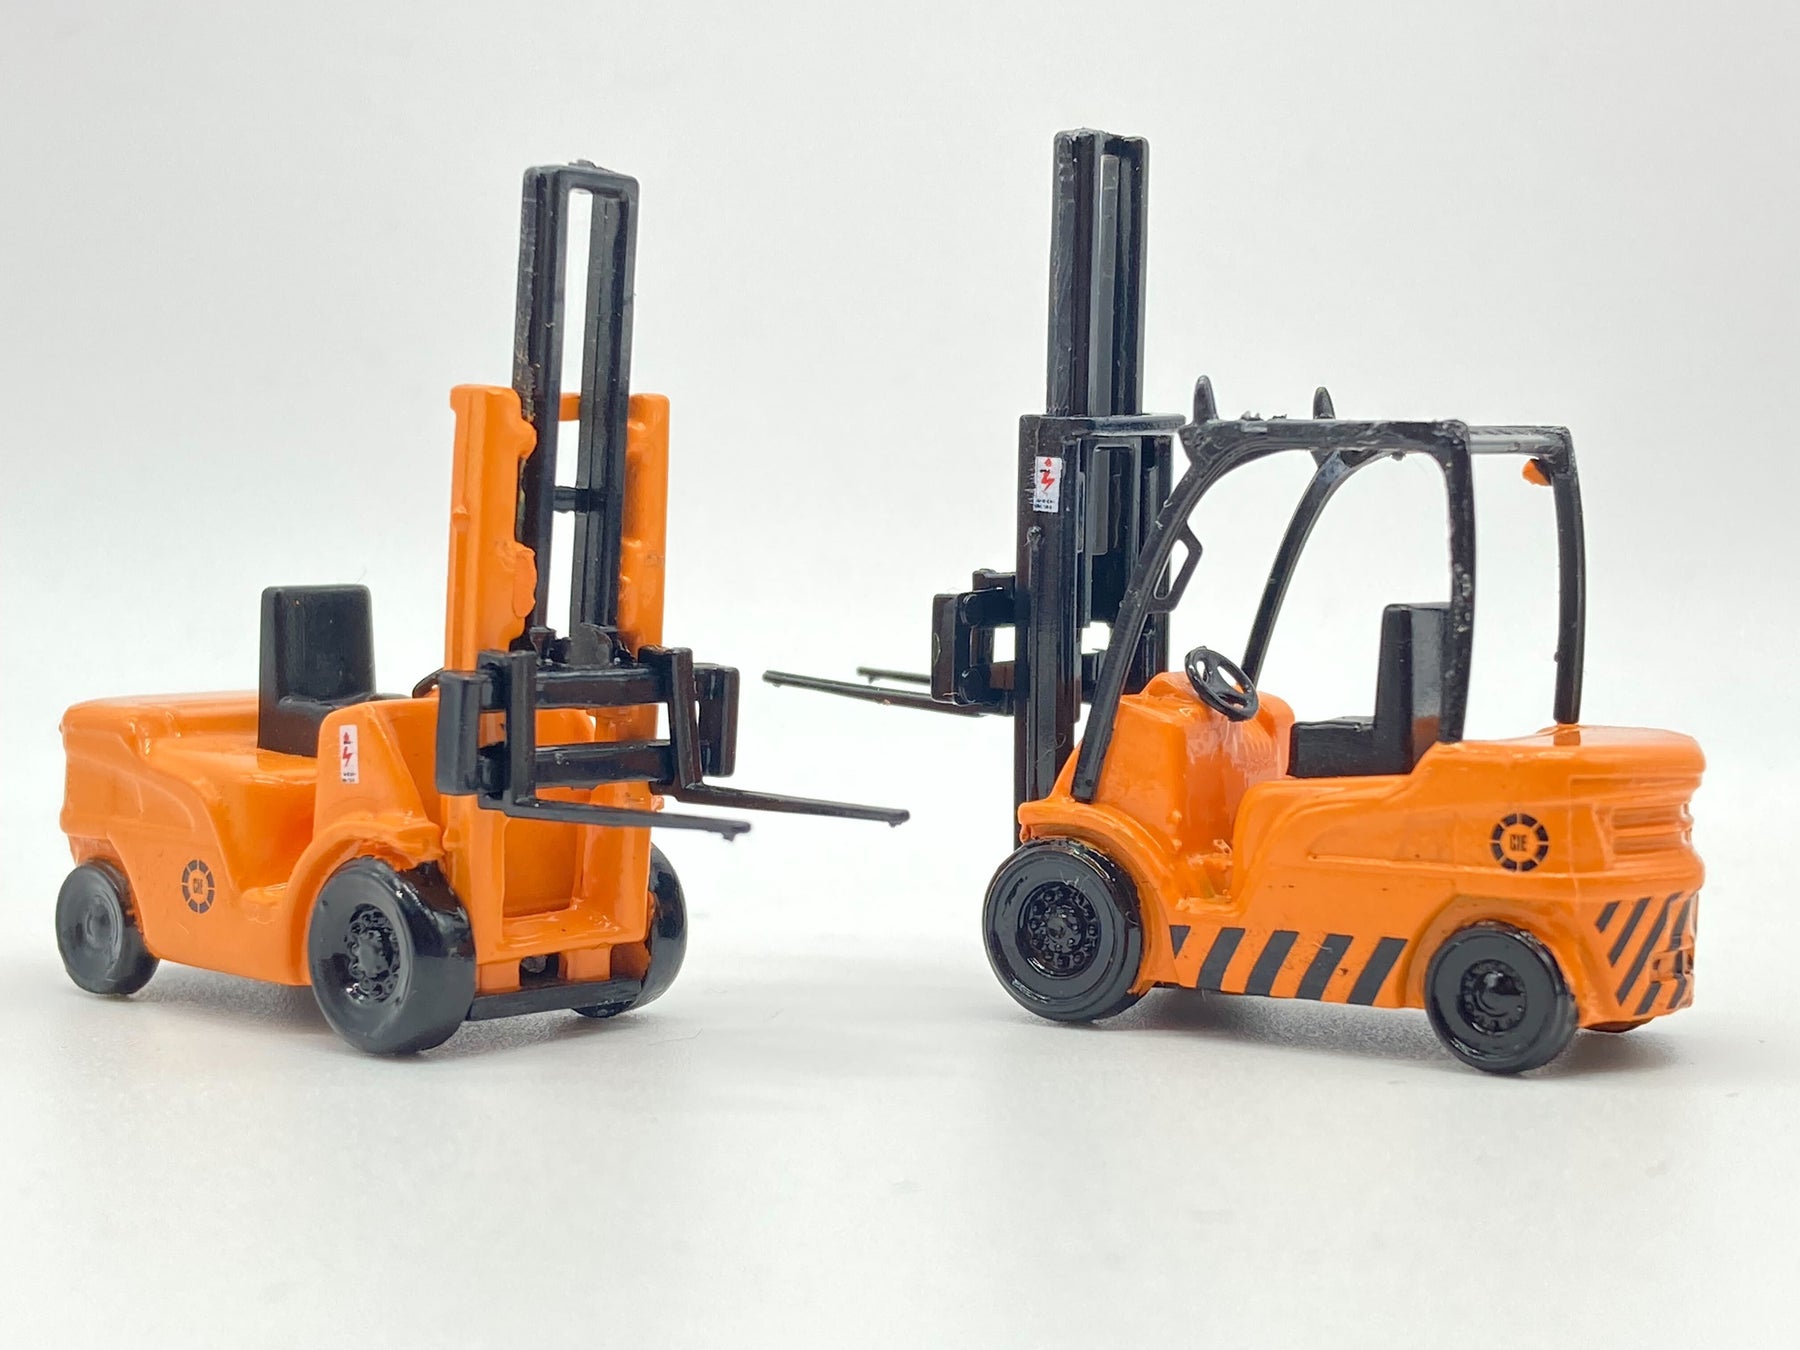 New Announcement - Give Your Depot a Lift With CIE Forklifts